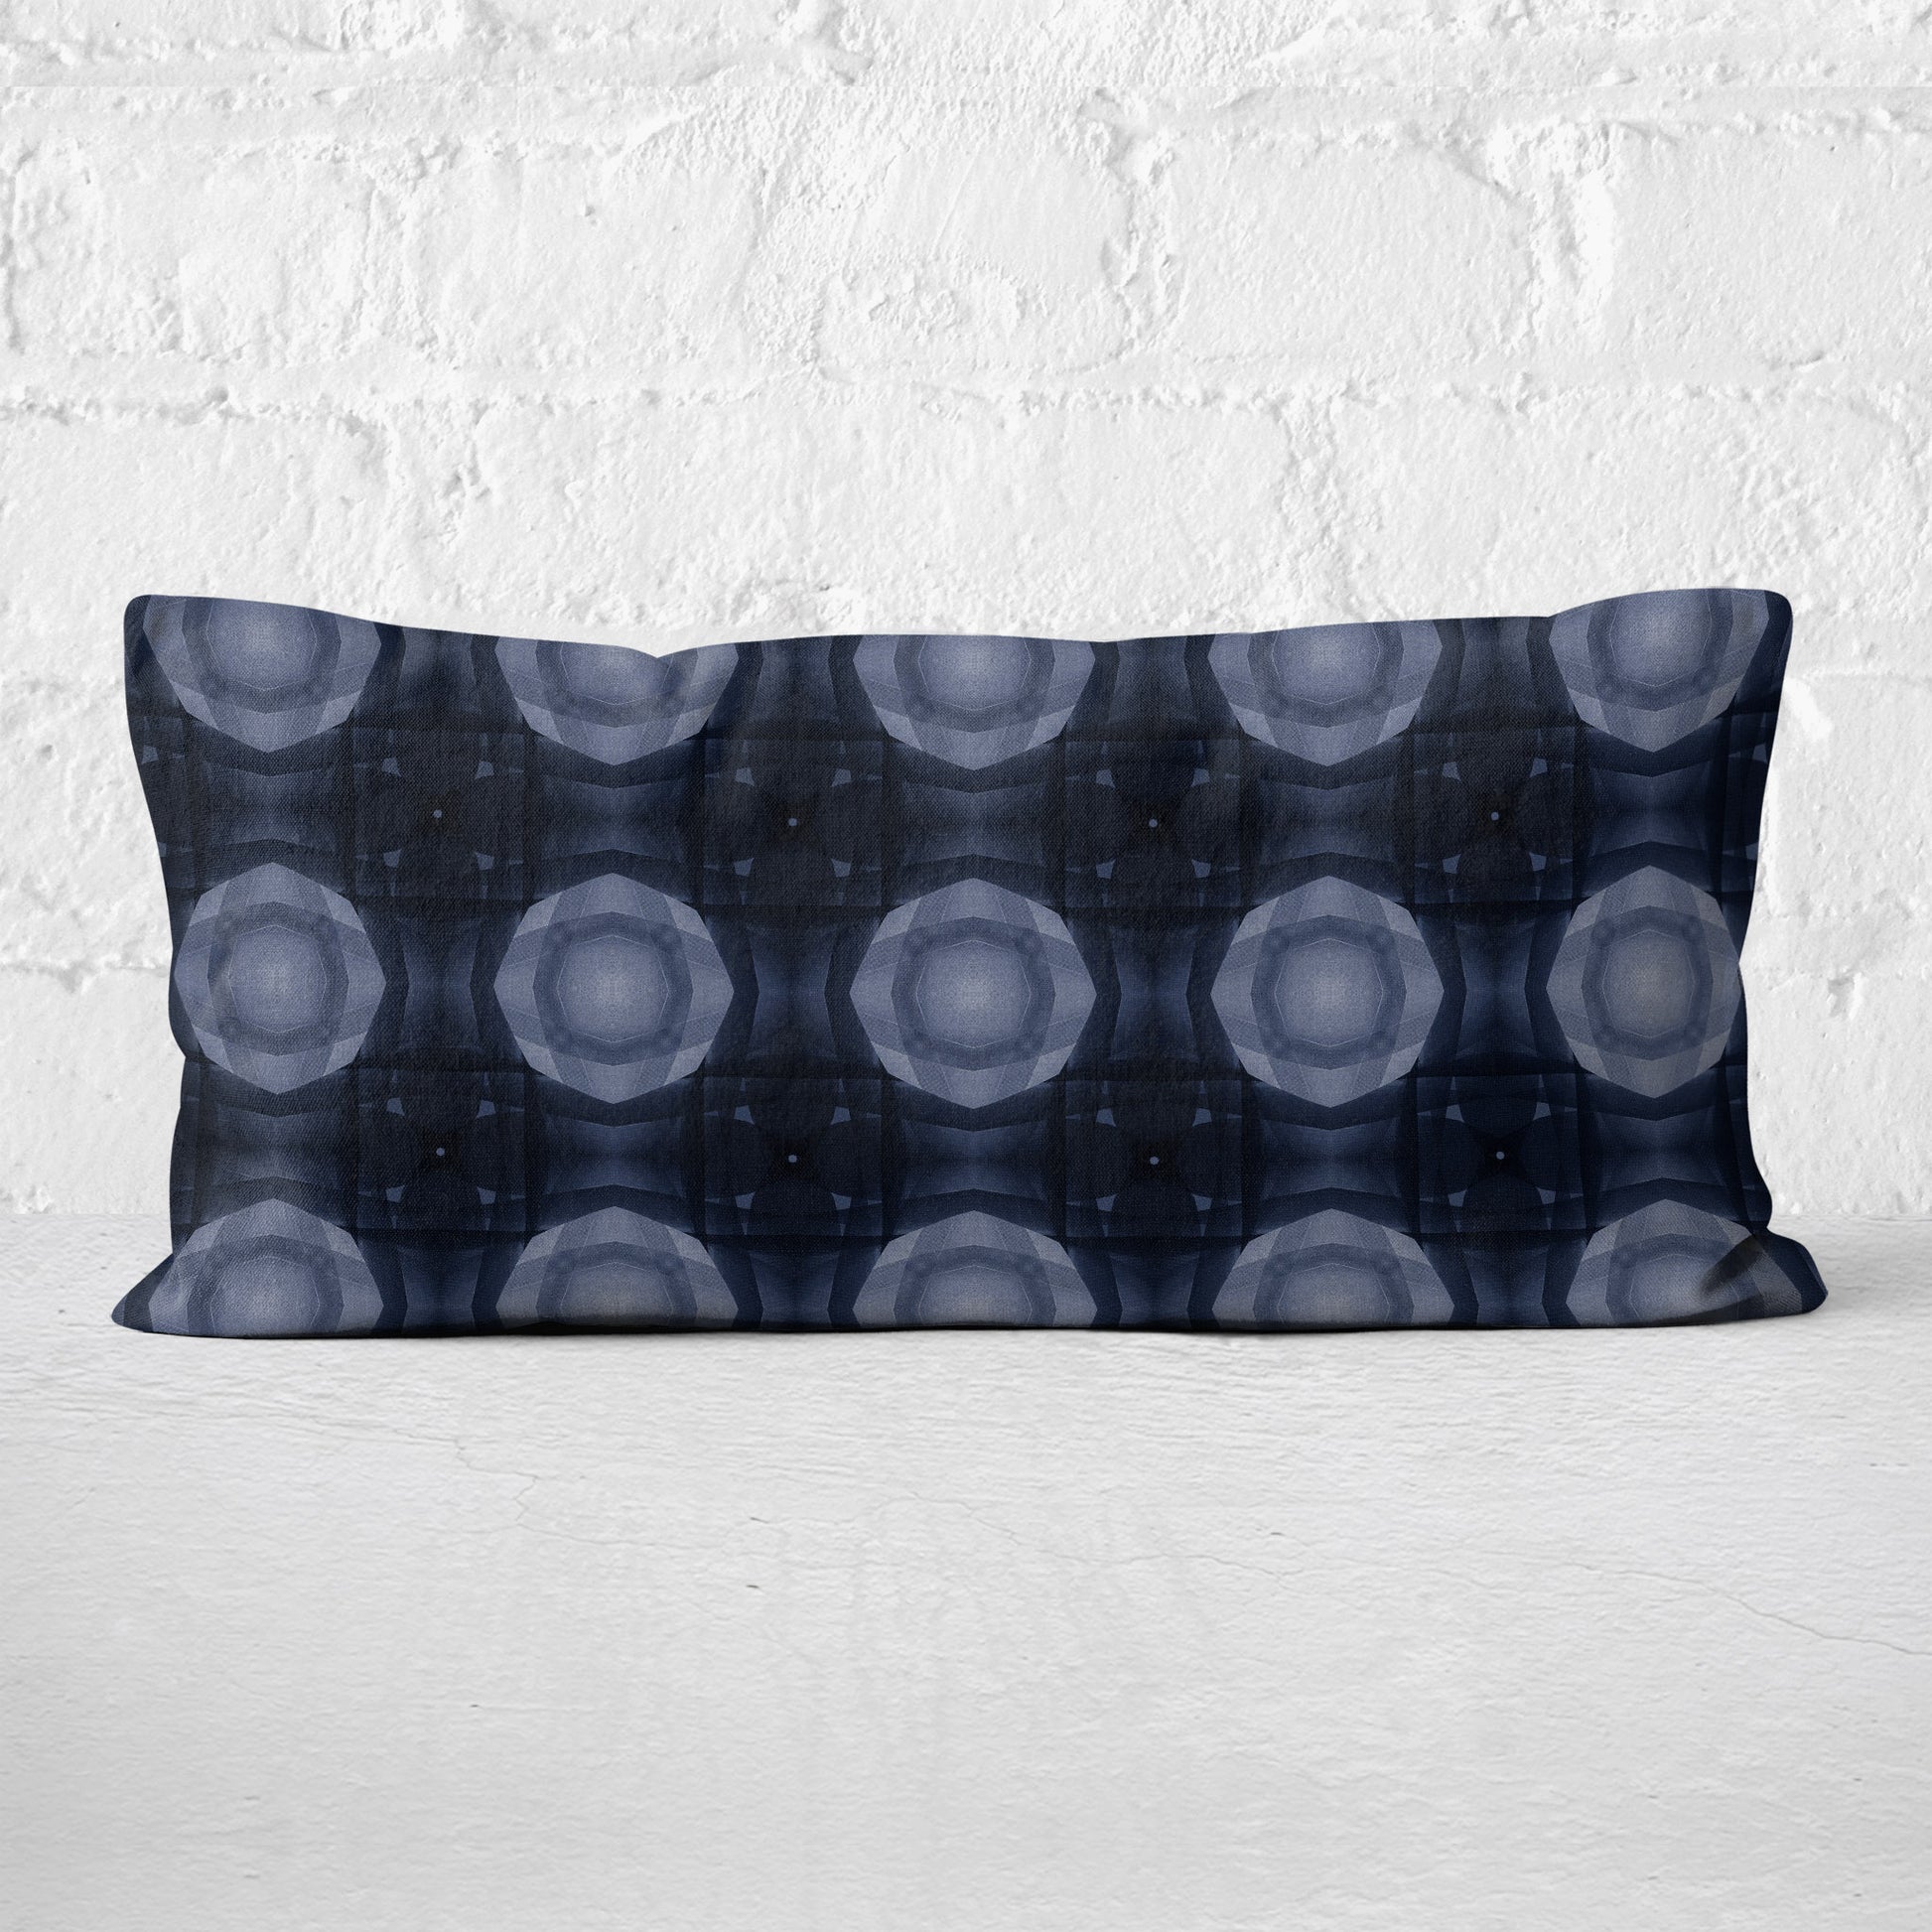 Lumbar pillow featuring a collage-based geometric pattern in shades of blue against a white brick background.